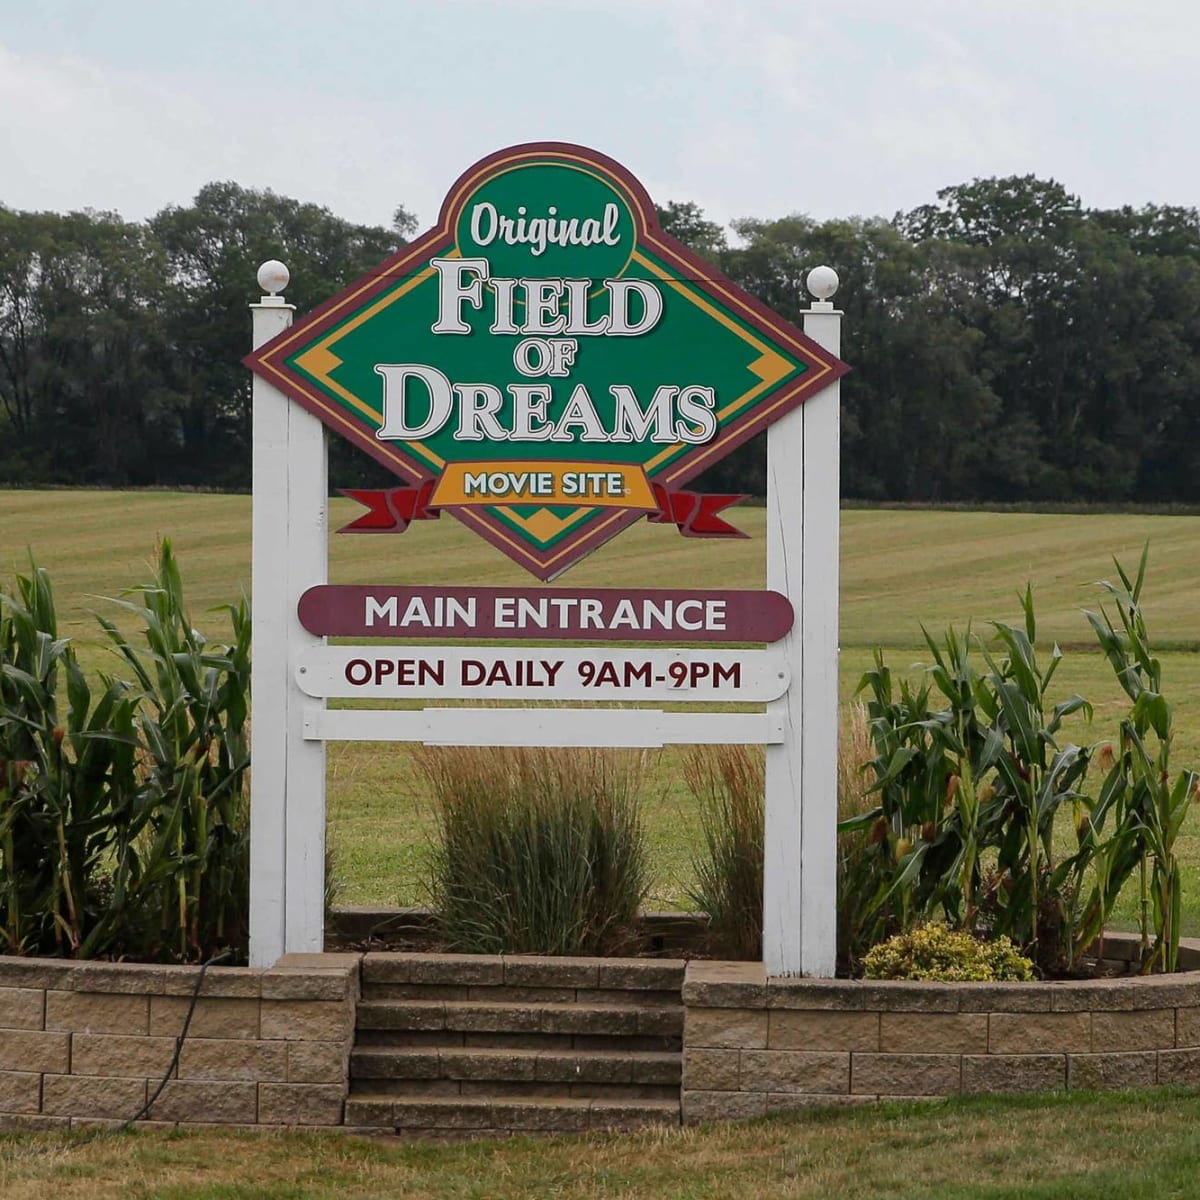 What to know for the Field of Dreams game